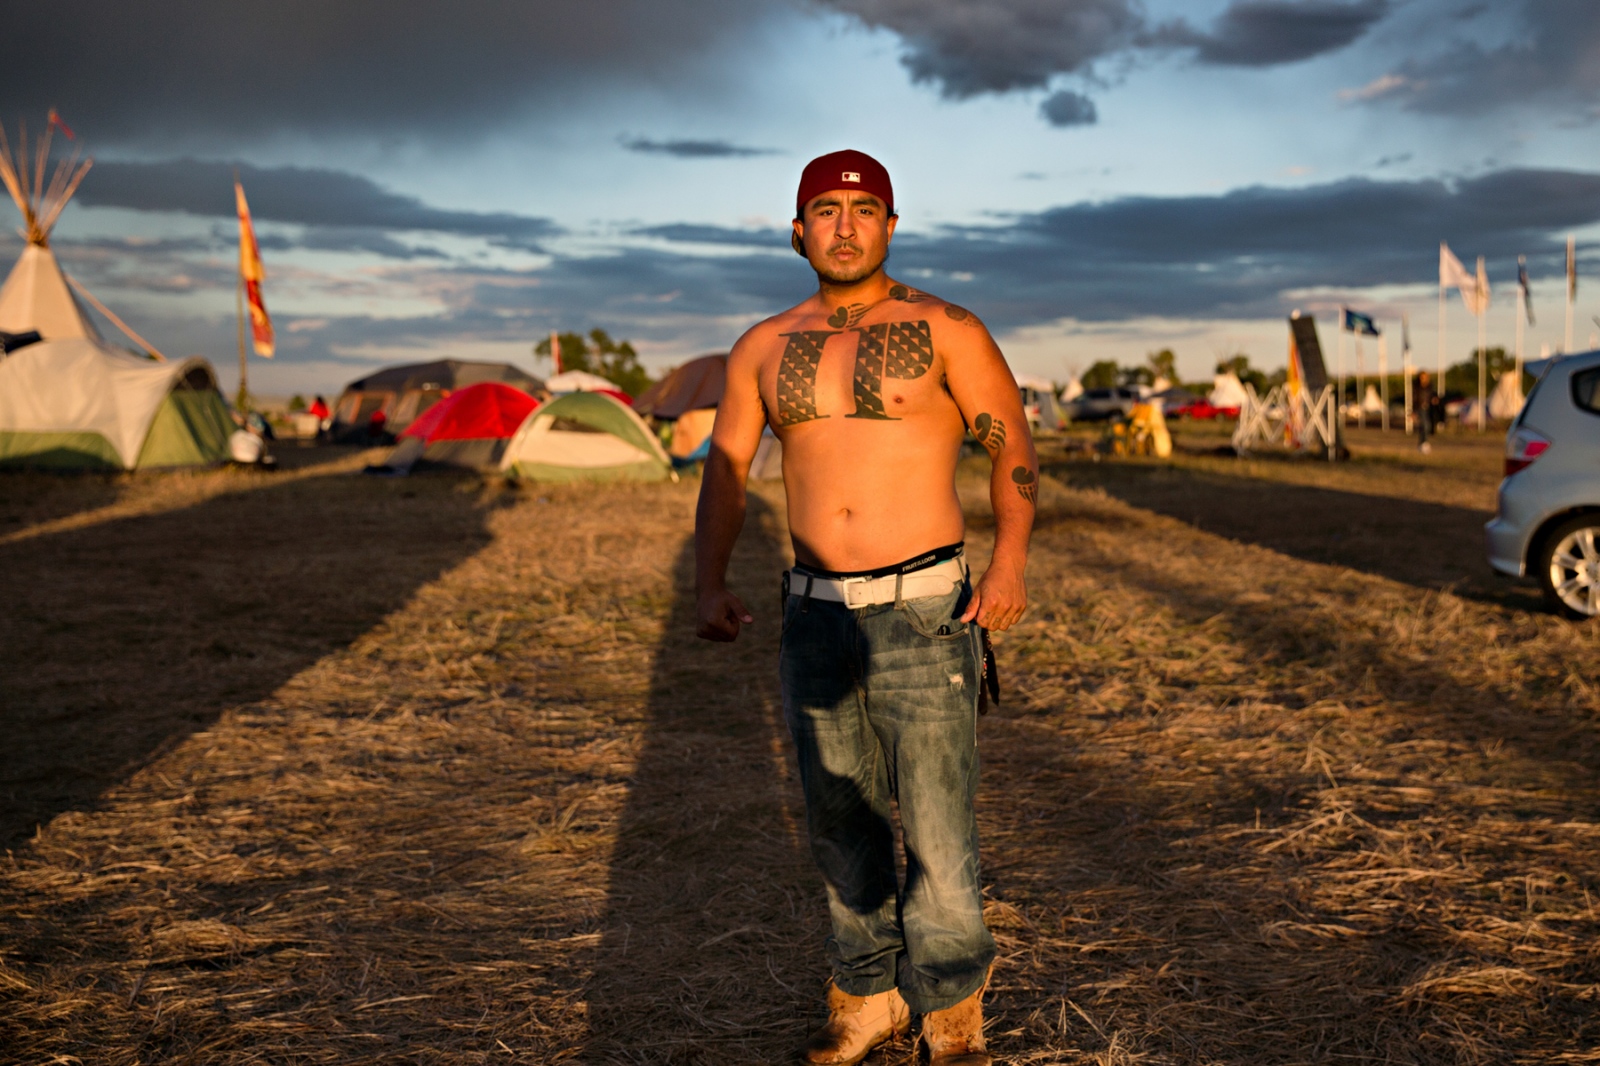 September 8, 2016&nbsp;- Cannon Ball, North Dakota, United States:&nbsp;Red Bear from Santa Rosa, CA came to support the NoDAPL movement along with his cousins. His tattoo of Indian Power took more than two days to finish.